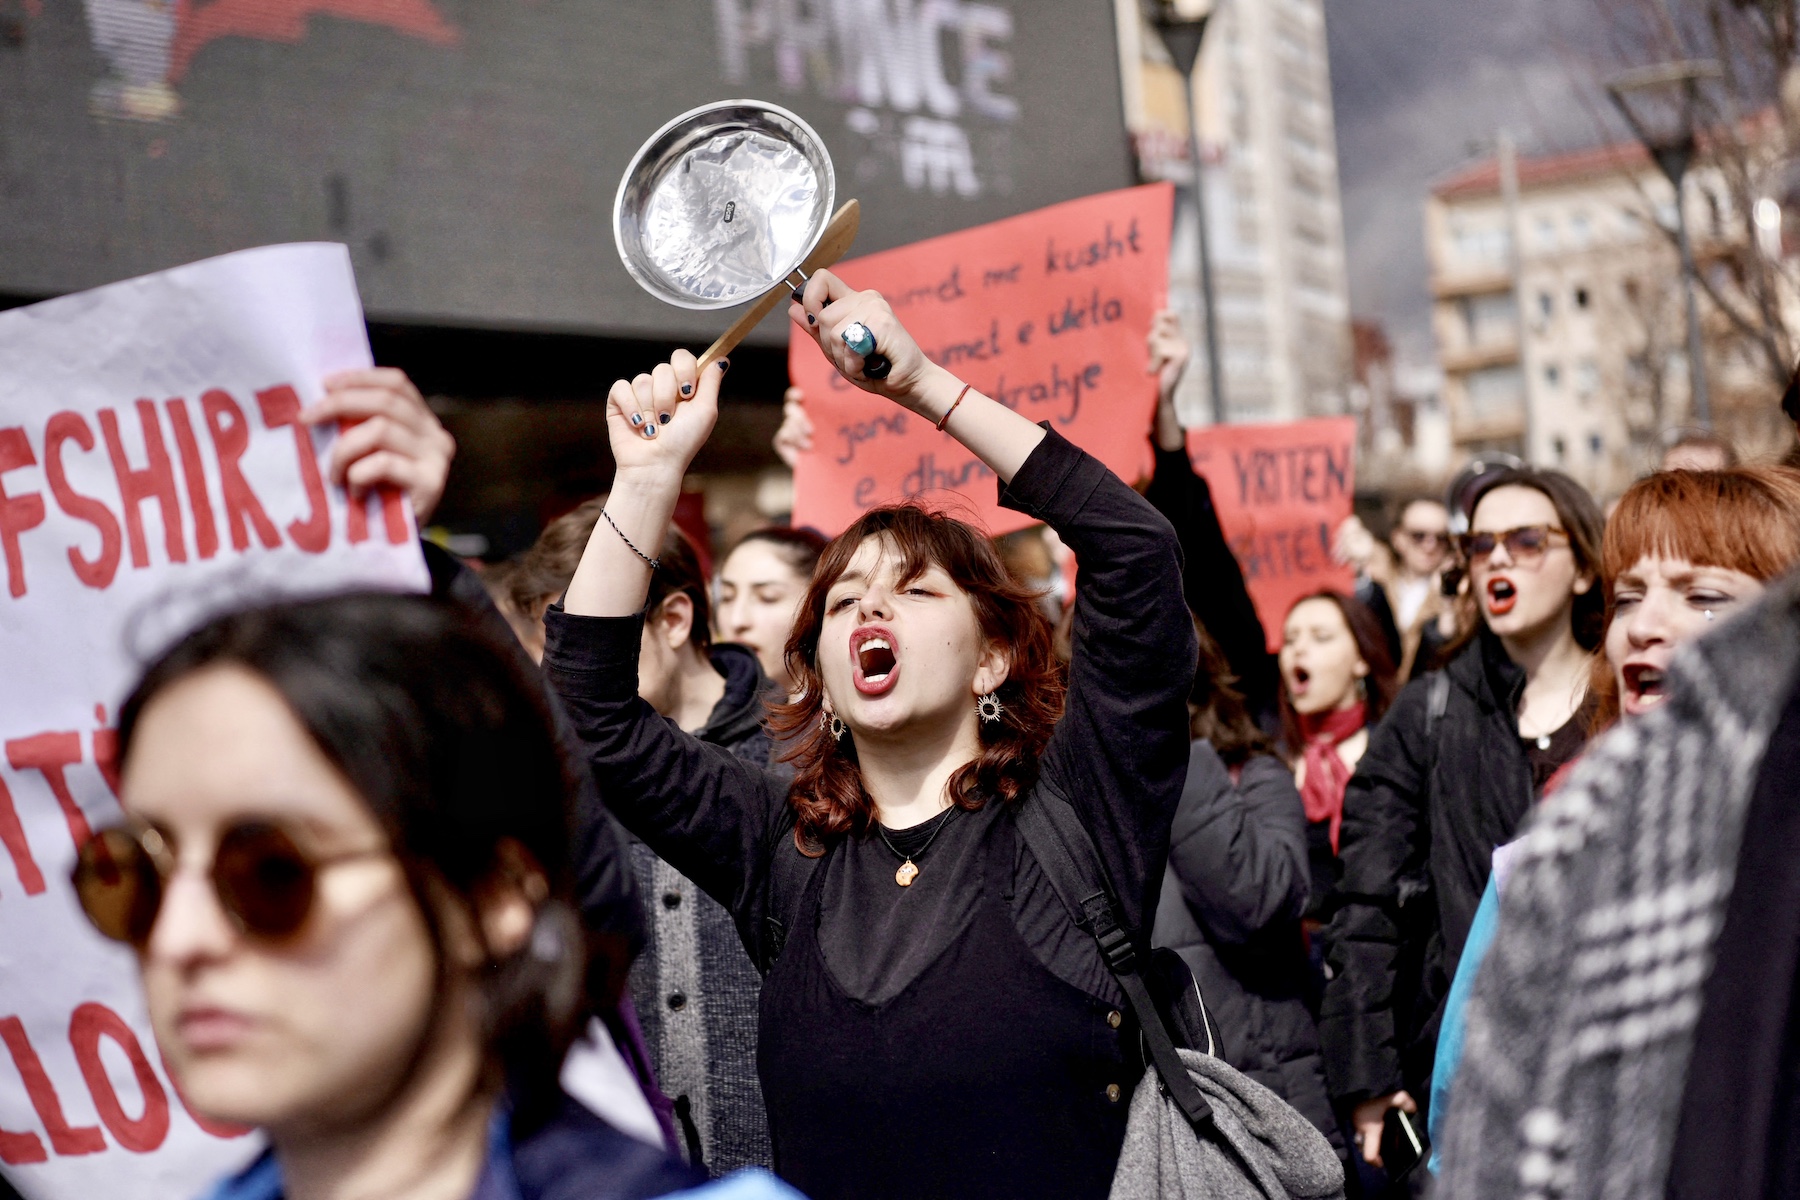 Woman makes noise with a pan and wooden spoon at the International Women's Day march in Kosovo. She is surrounded by women, who also appear to be shouting and holding red banners.